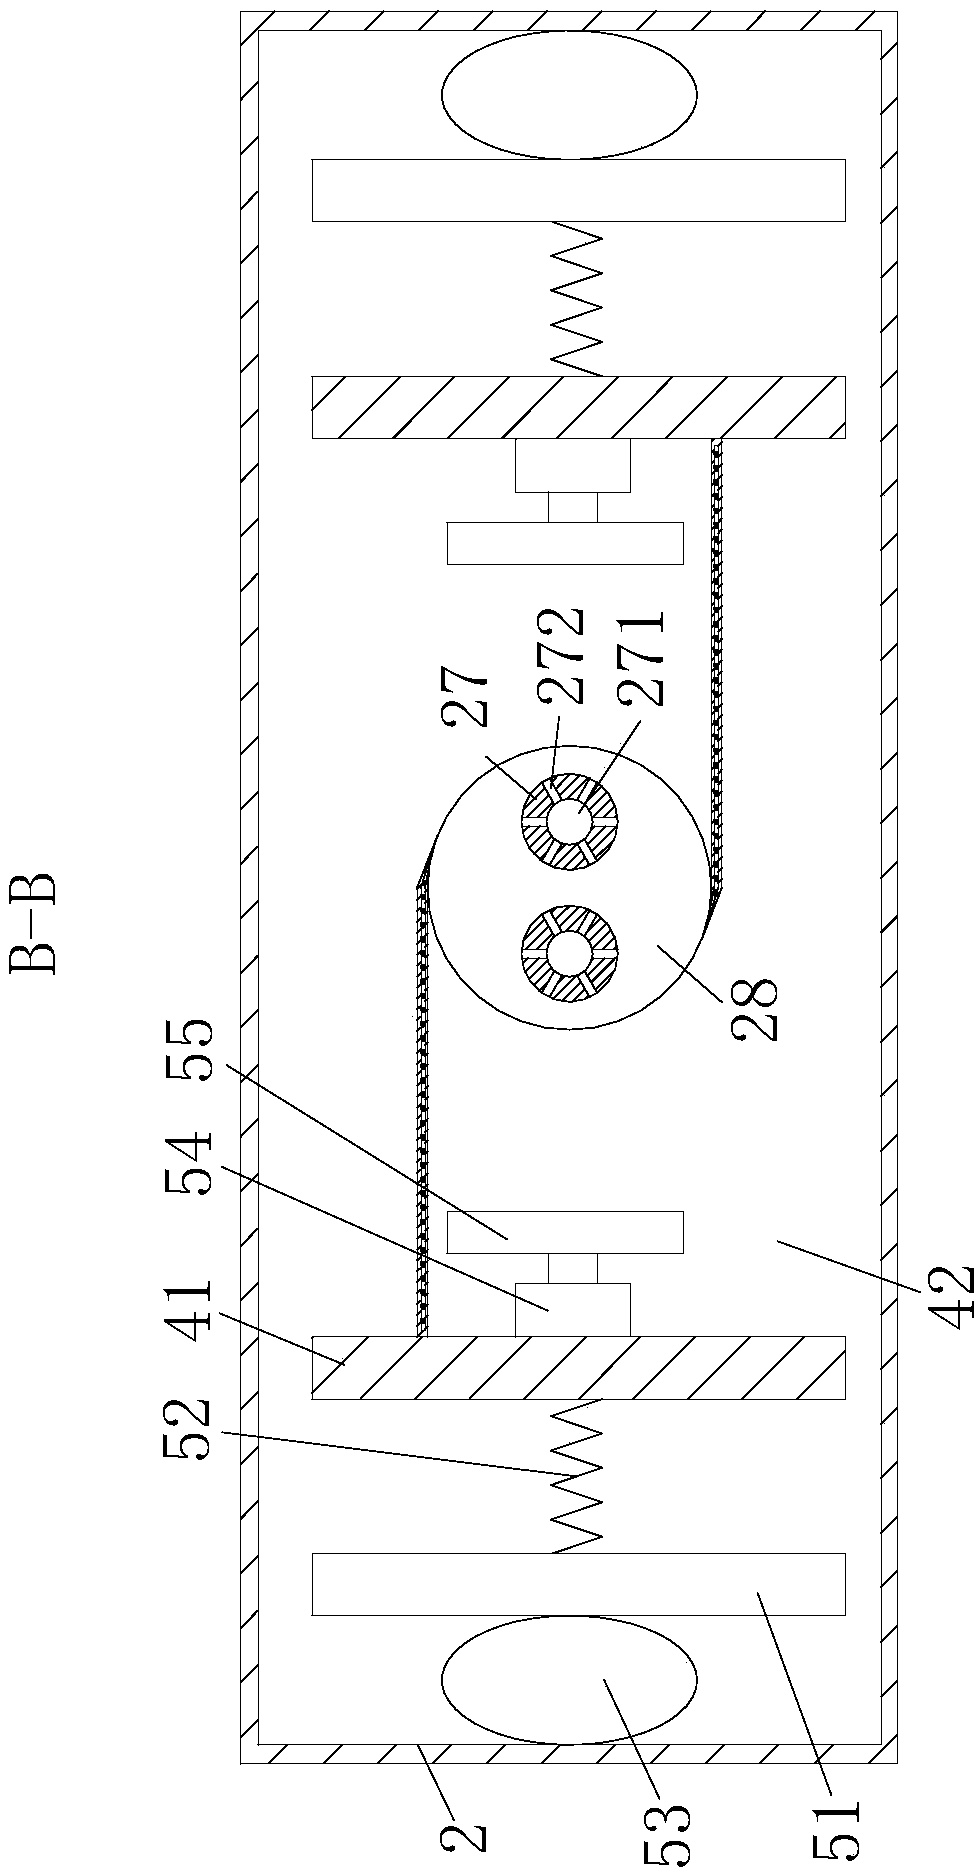 Mixing process production device for construction